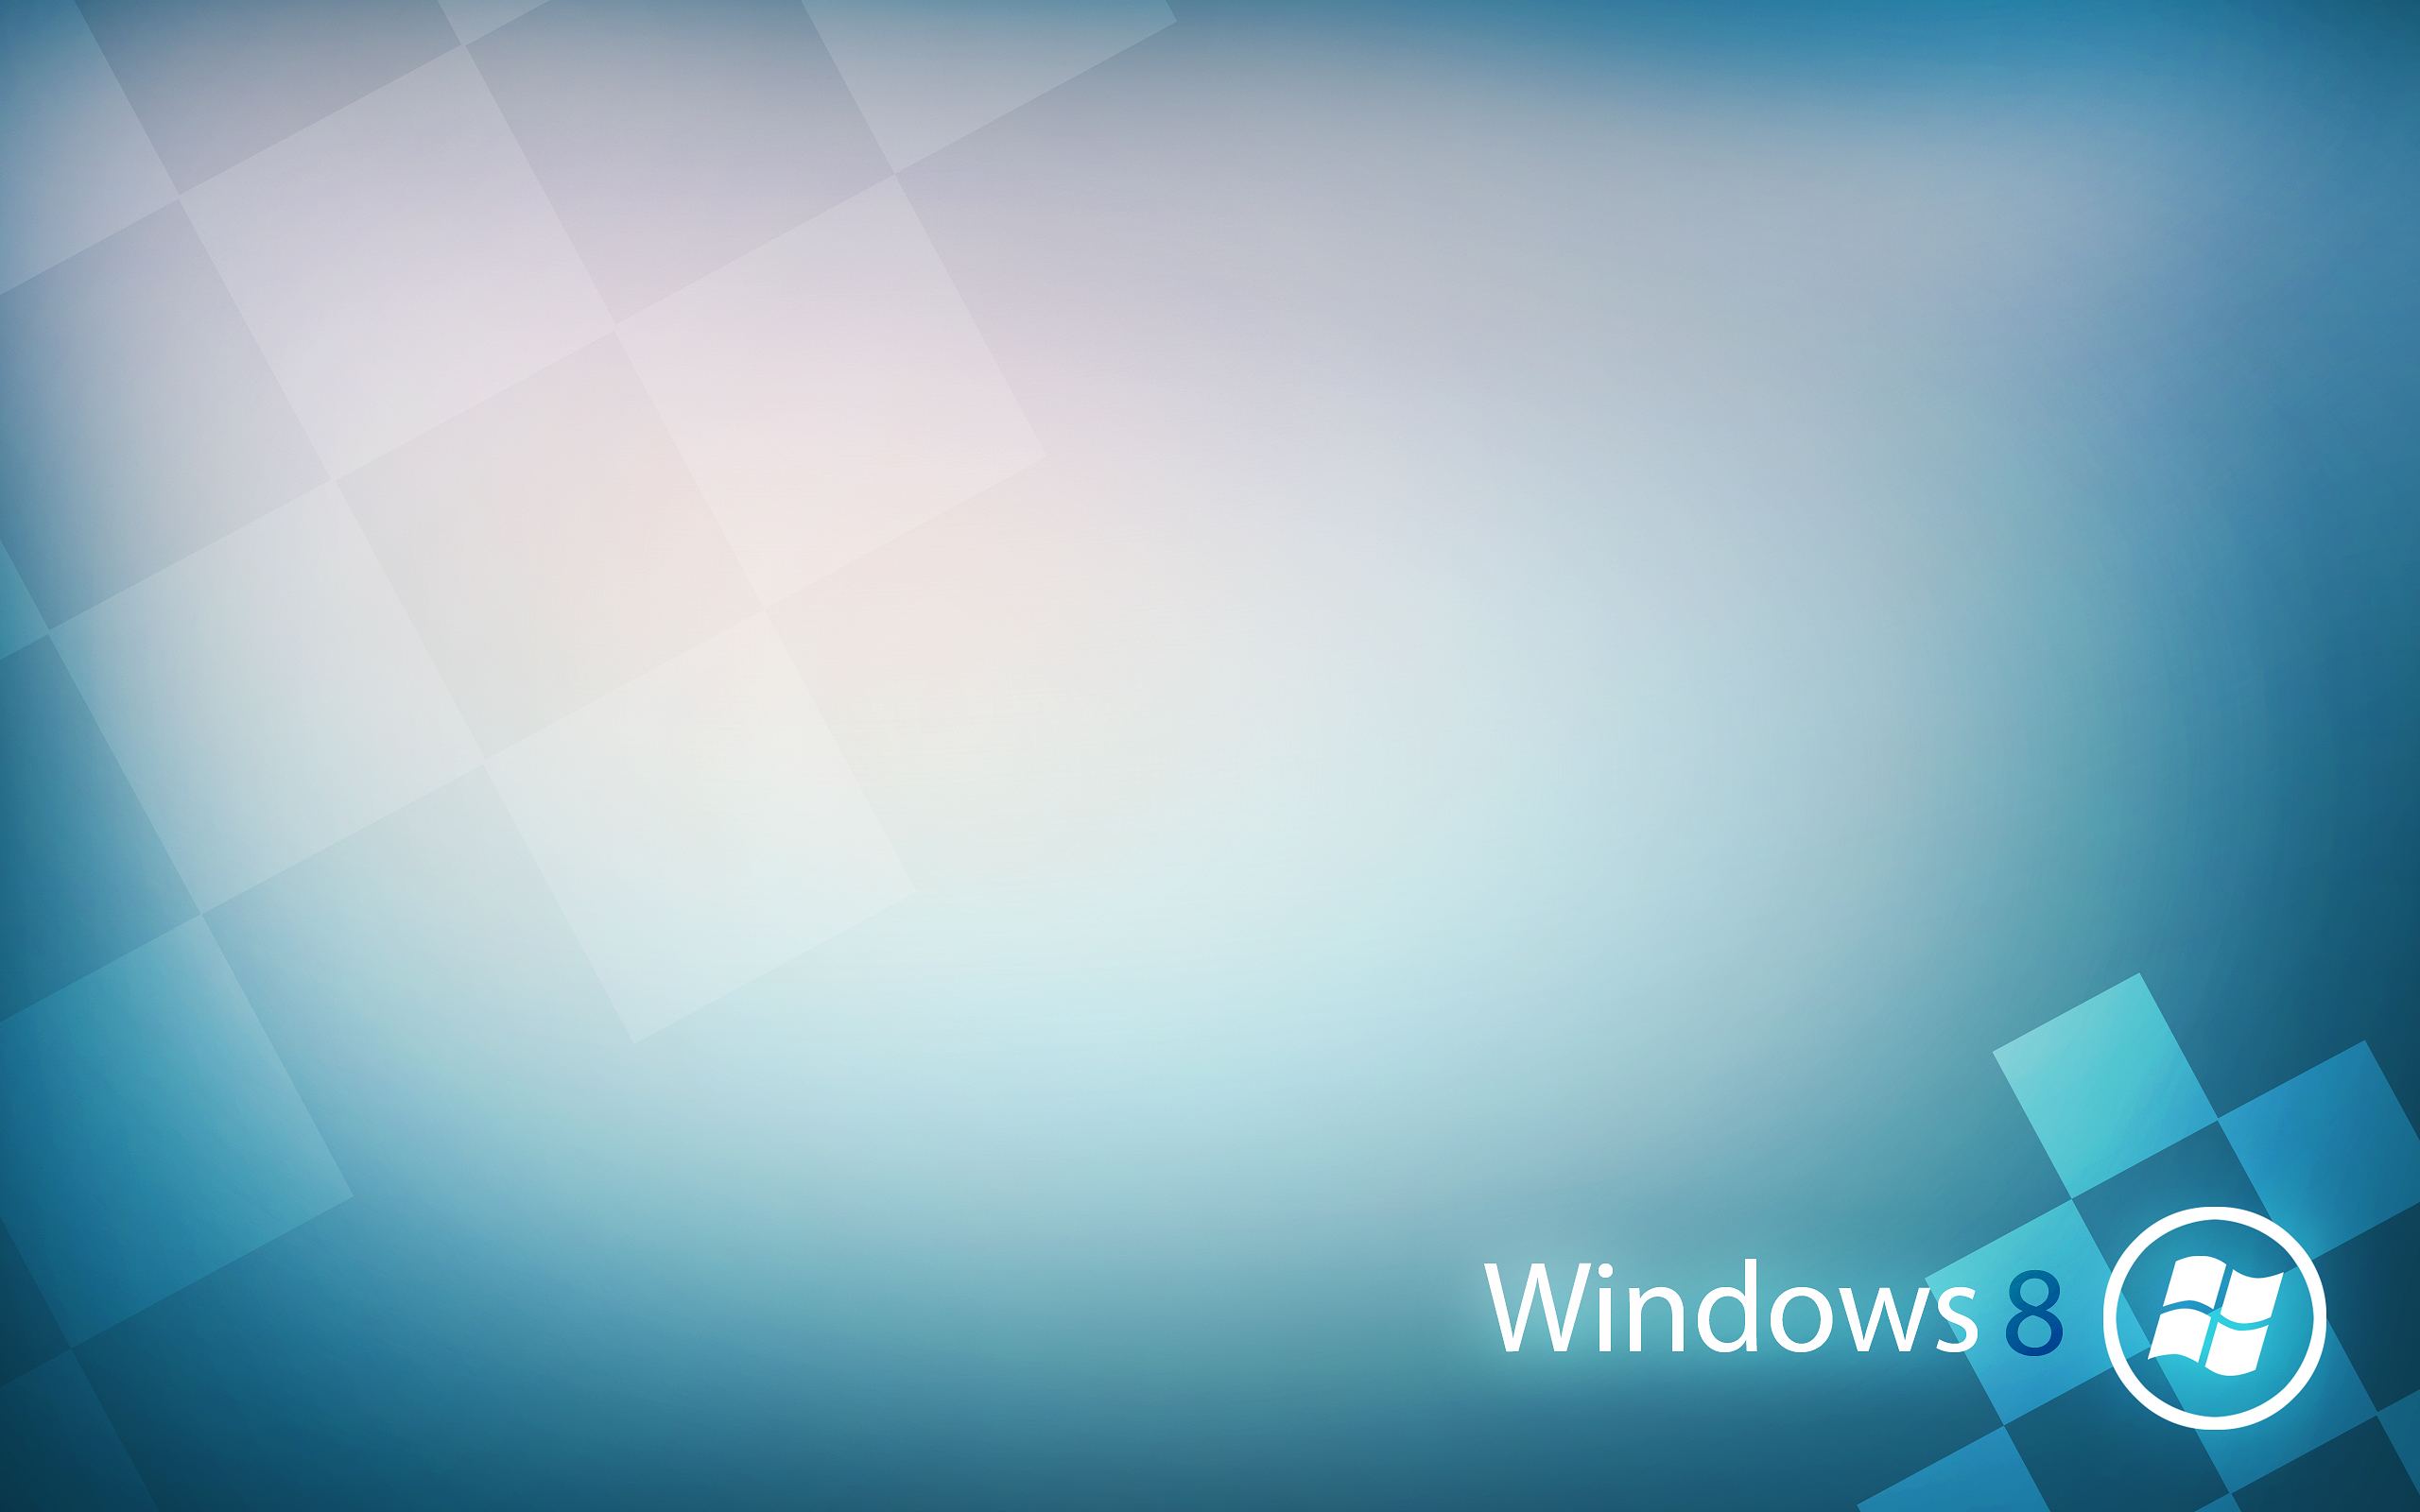 HD Wallpapers for Windows 8 